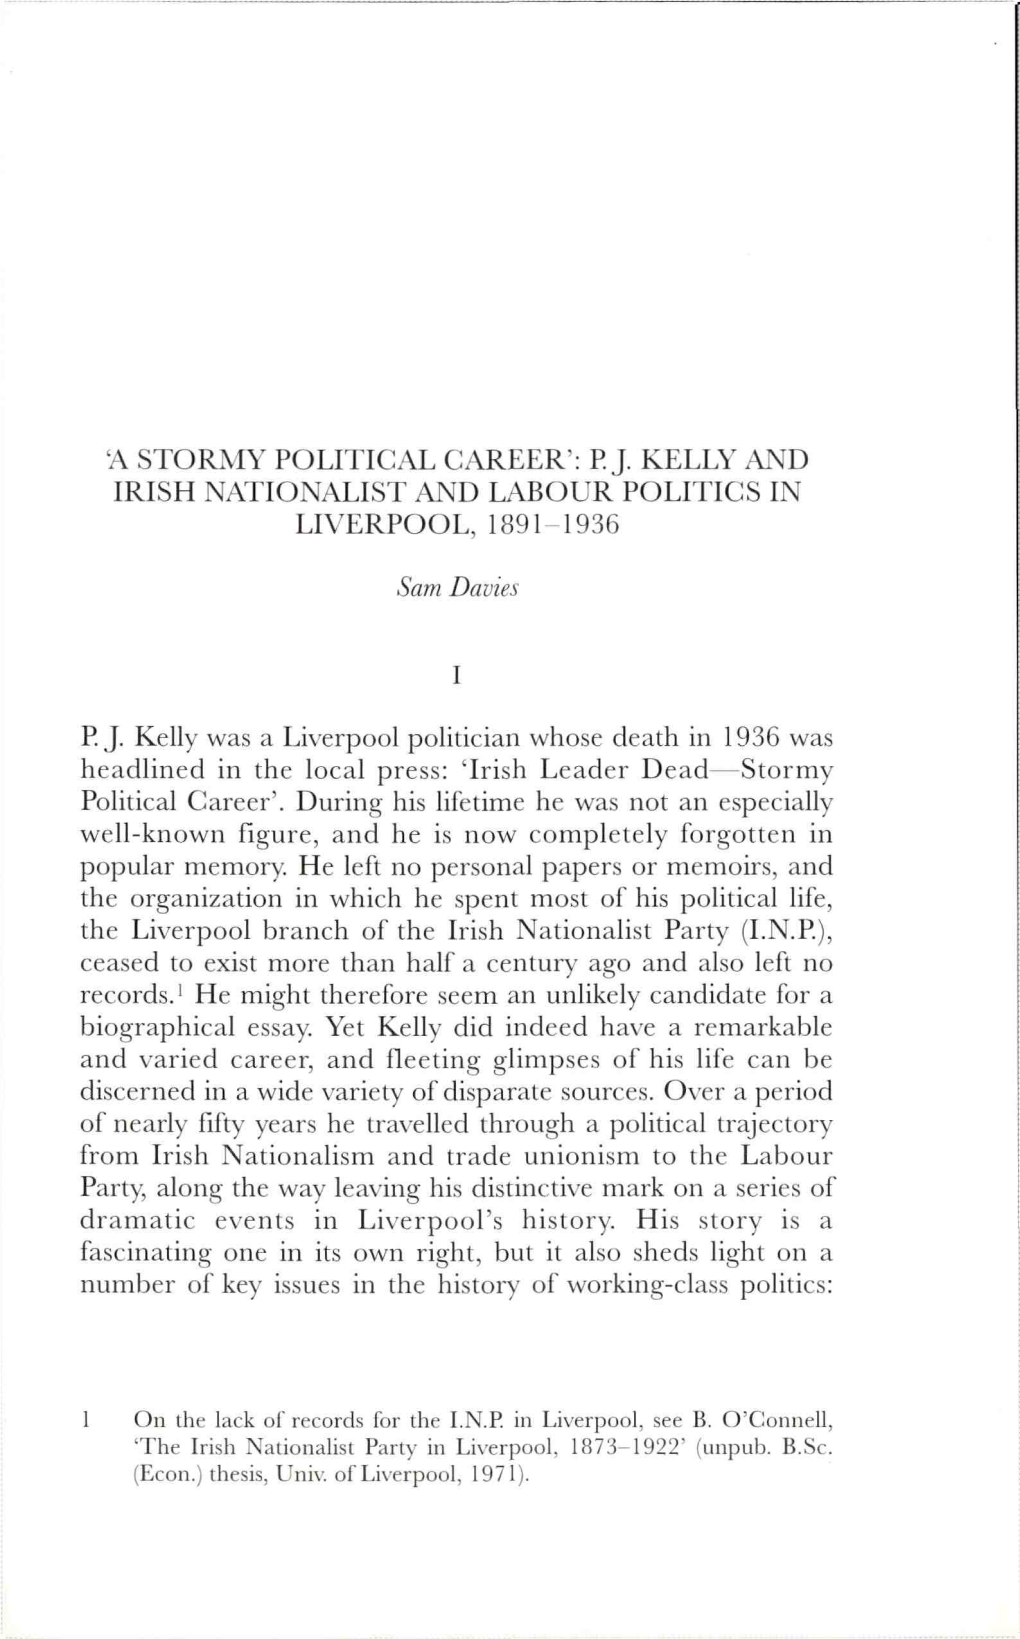 'A Stormy Political Carelr': P. J. Kelly and Irish Nationalist and Labour Politics in Liverpool, 1891-1936